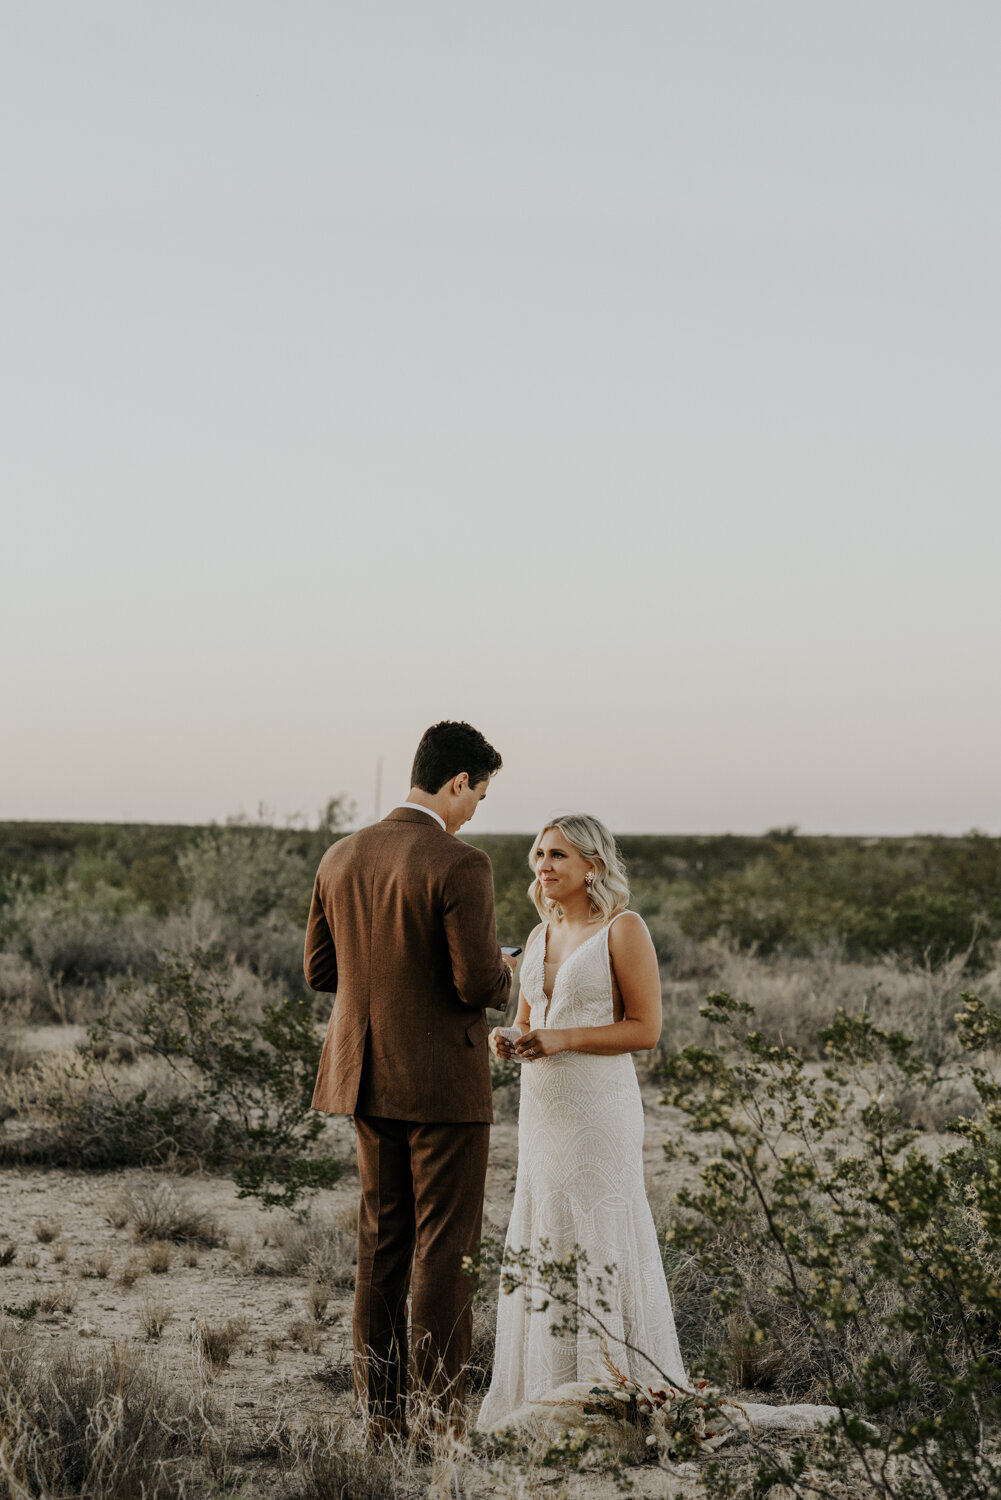 Marfa, Texas Elopement Private Vows